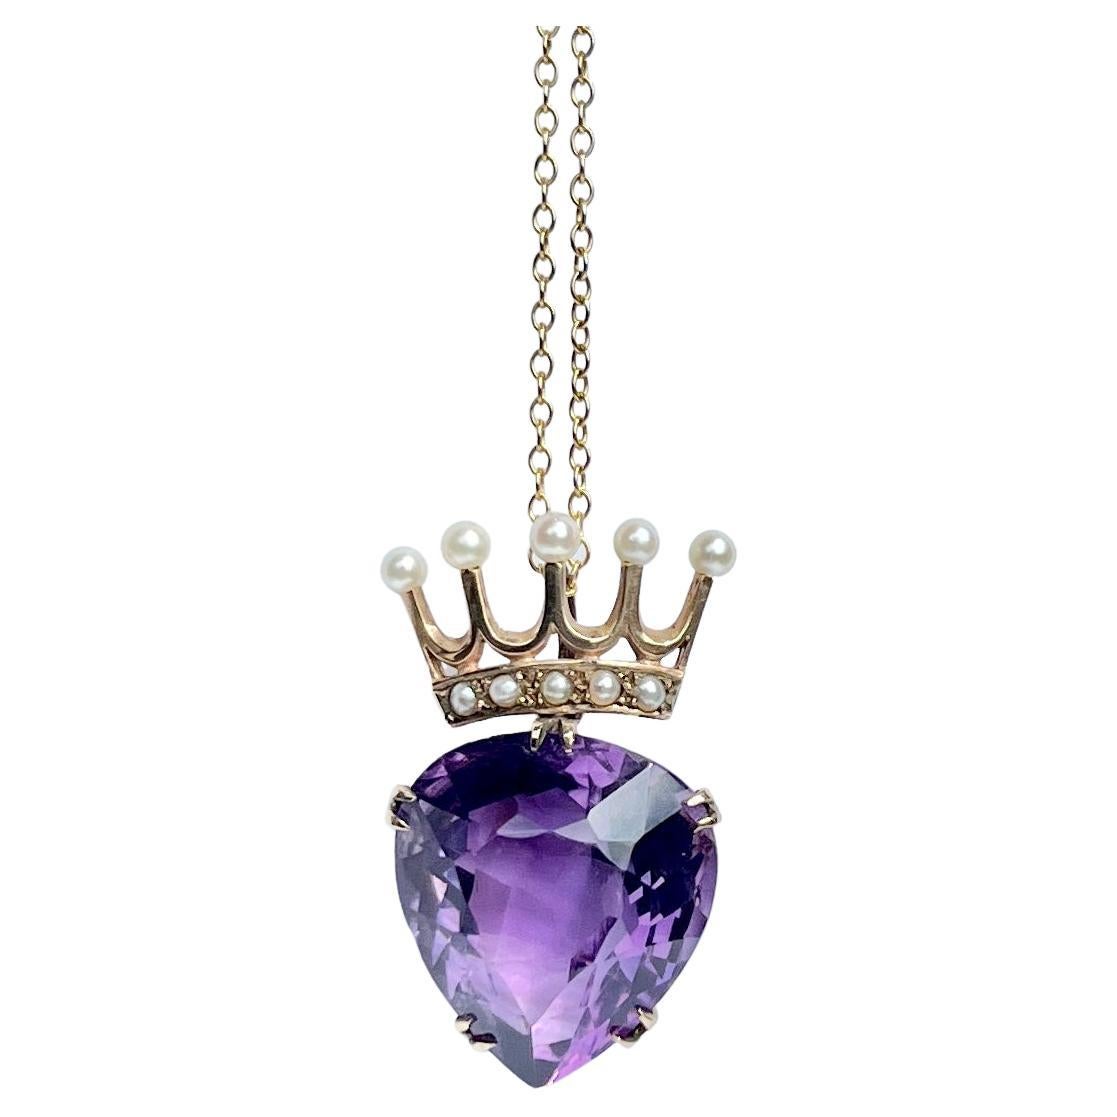 Vintage Luckenbooth Amethyst and 9 Carat Gold Pendant Necklace For Sale